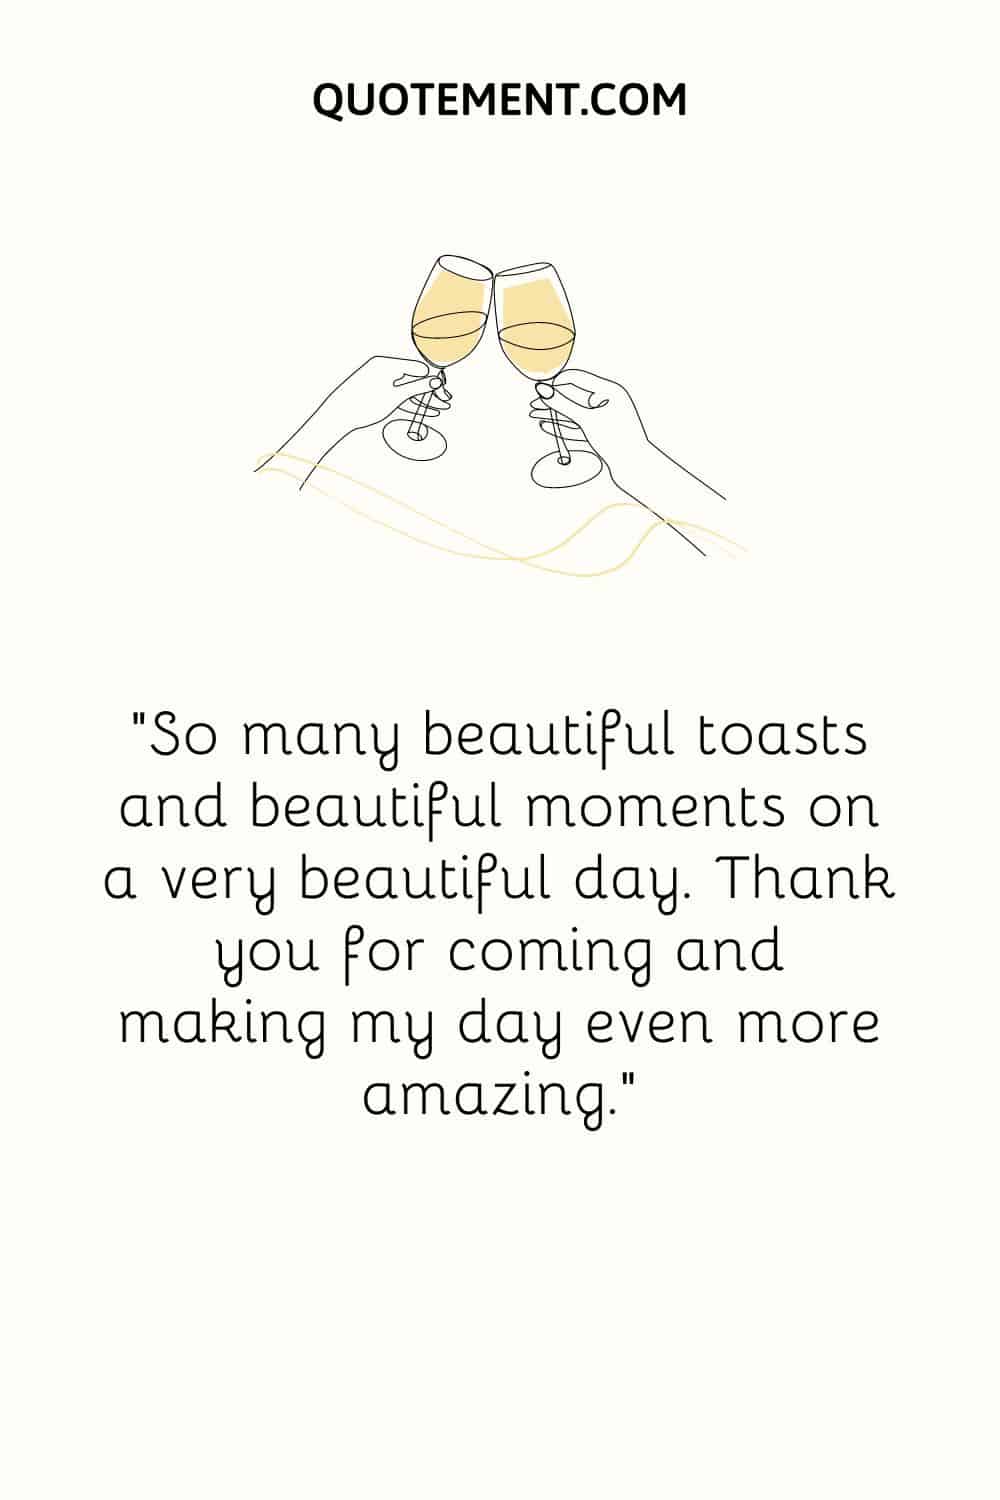 Heartwarming thank you all for coming message and a toast.